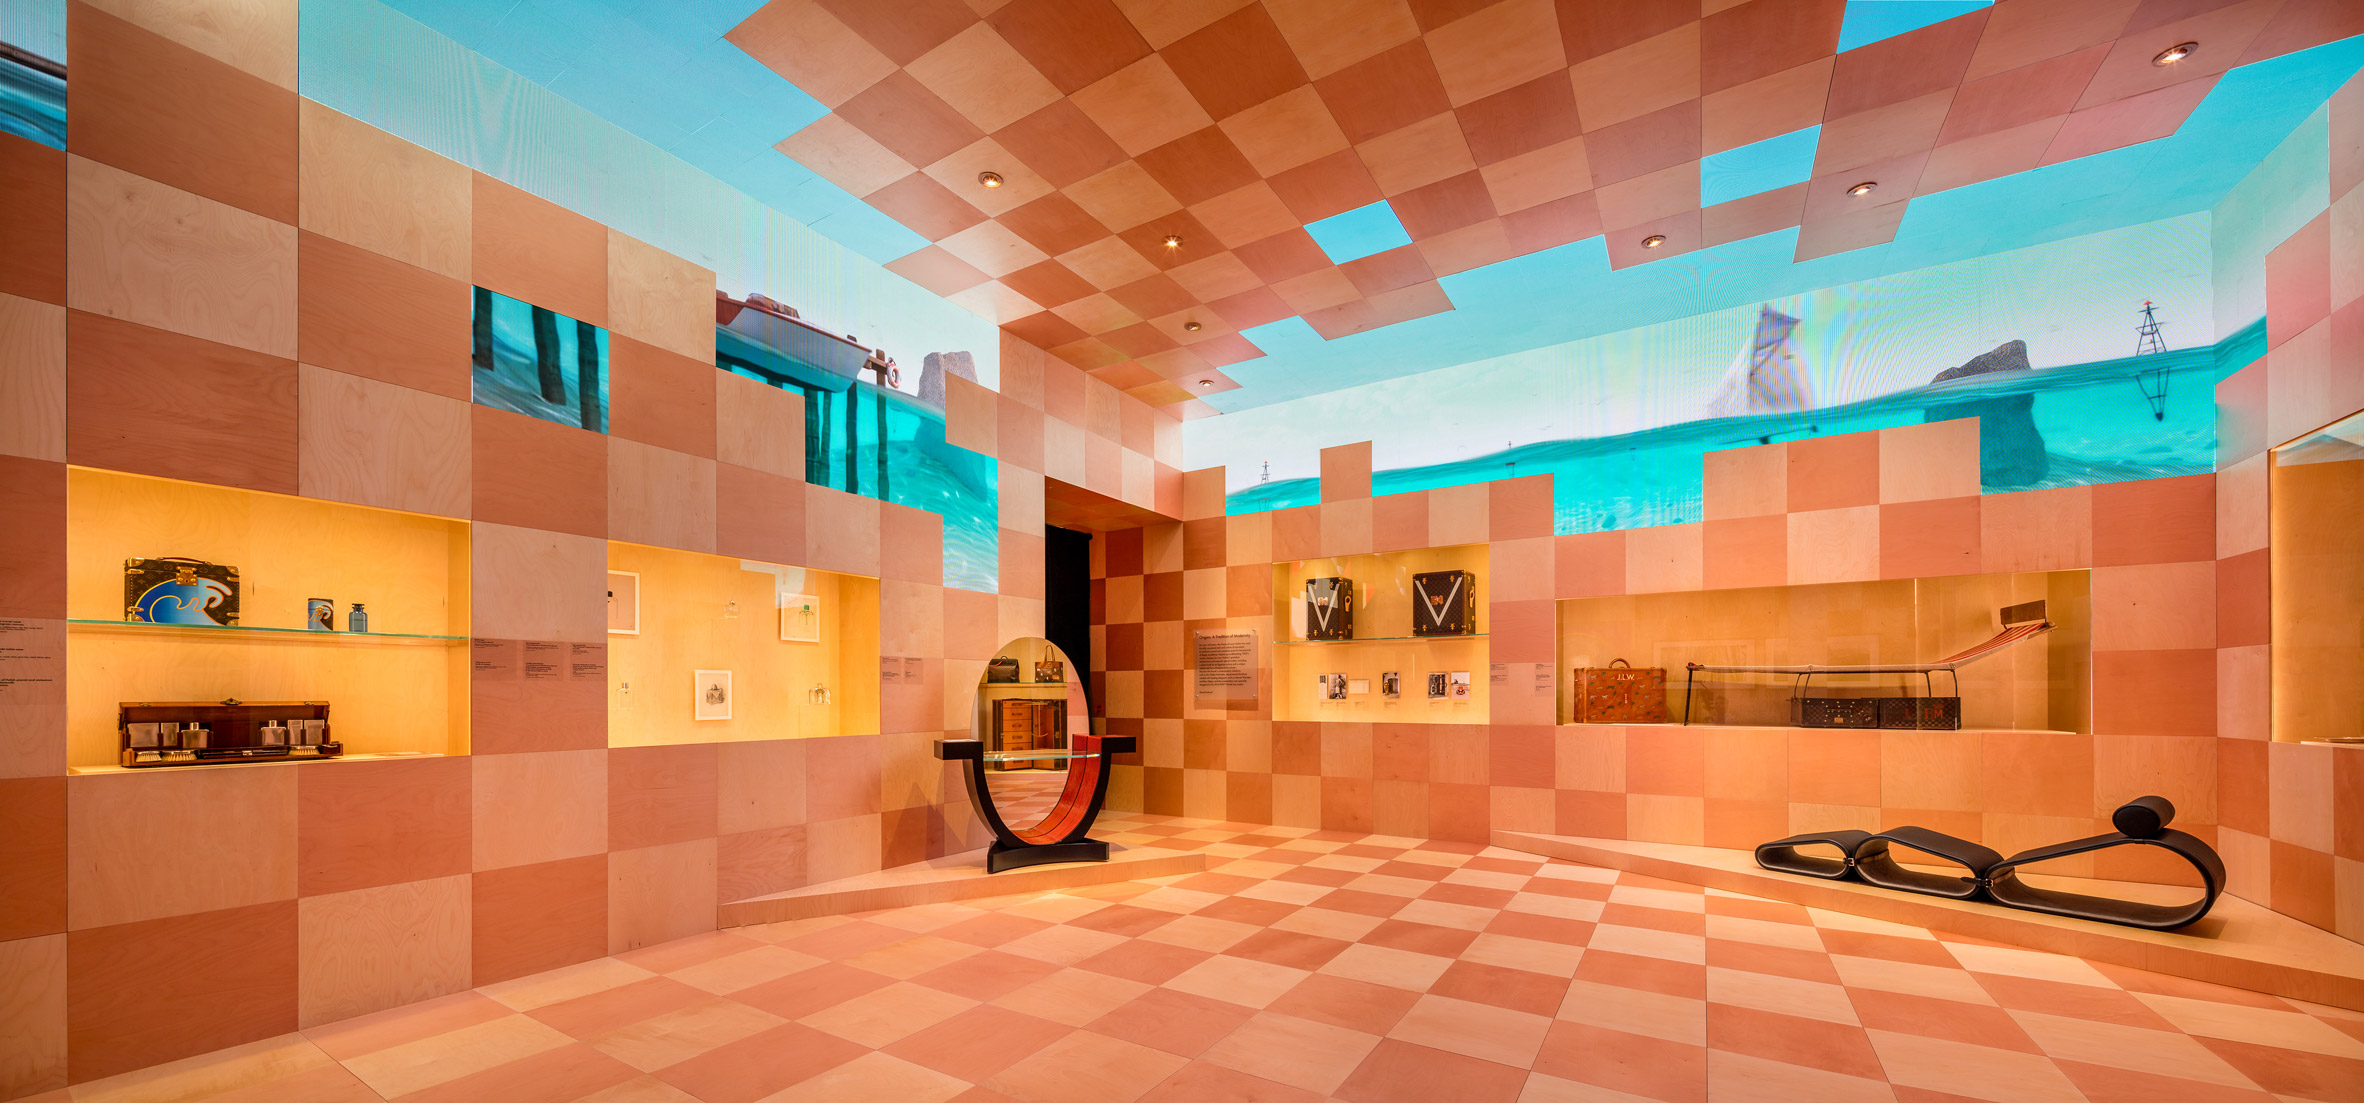 Louis Vuitton Opens a Monolithic Exhibition in L.A. and Debuts Six